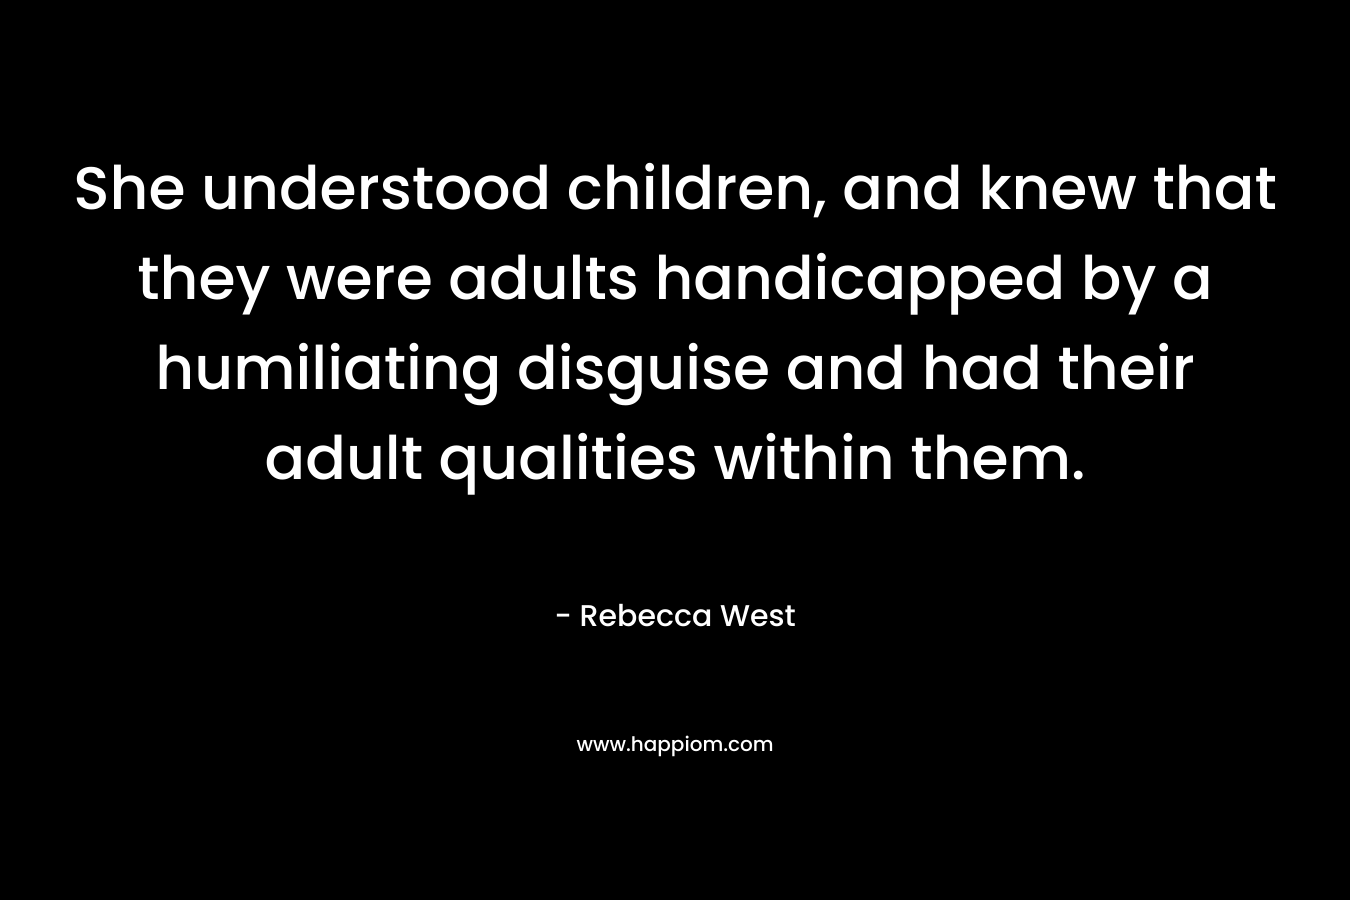 She understood children, and knew that they were adults handicapped by a humiliating disguise and had their adult qualities within them.